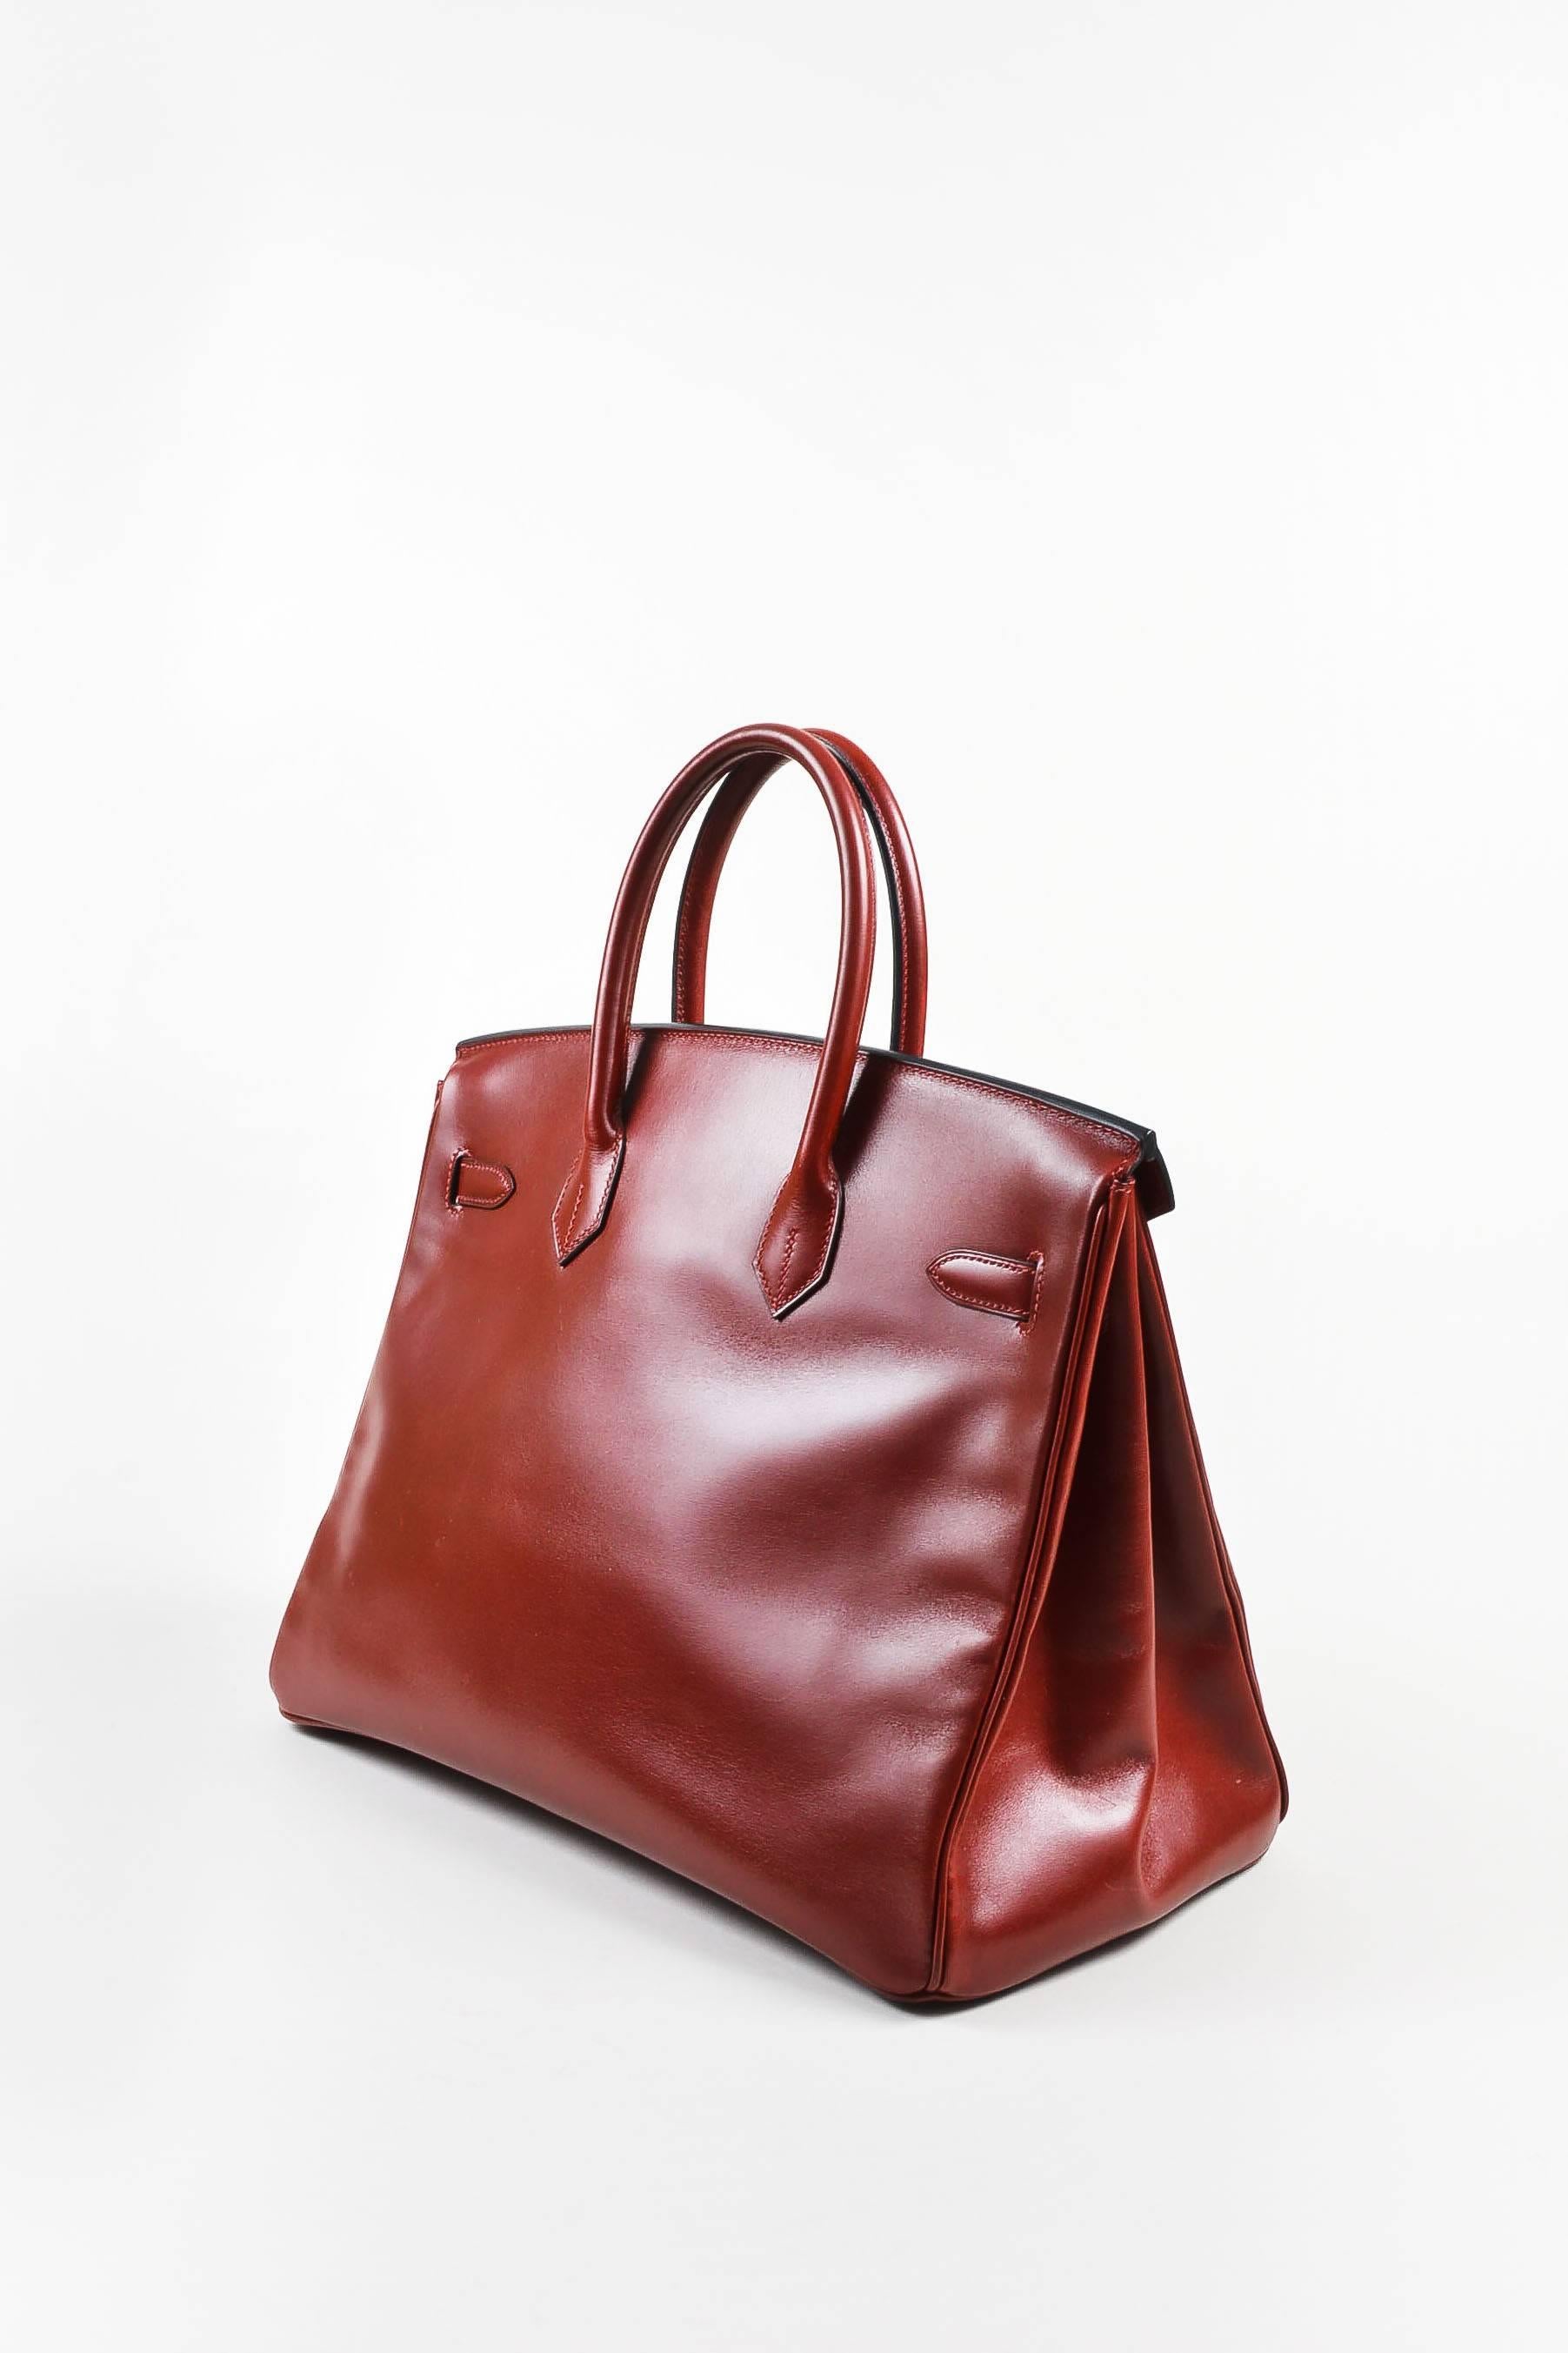 Comes in dust bag. Circa 2001. This 35cm size Birkin handbag is constructed of rich oxblood red box calf leather with gold-tone metal hardware. Two rolled top handles. Front straps secure with a padlock to close the main turn lock. Comes with two